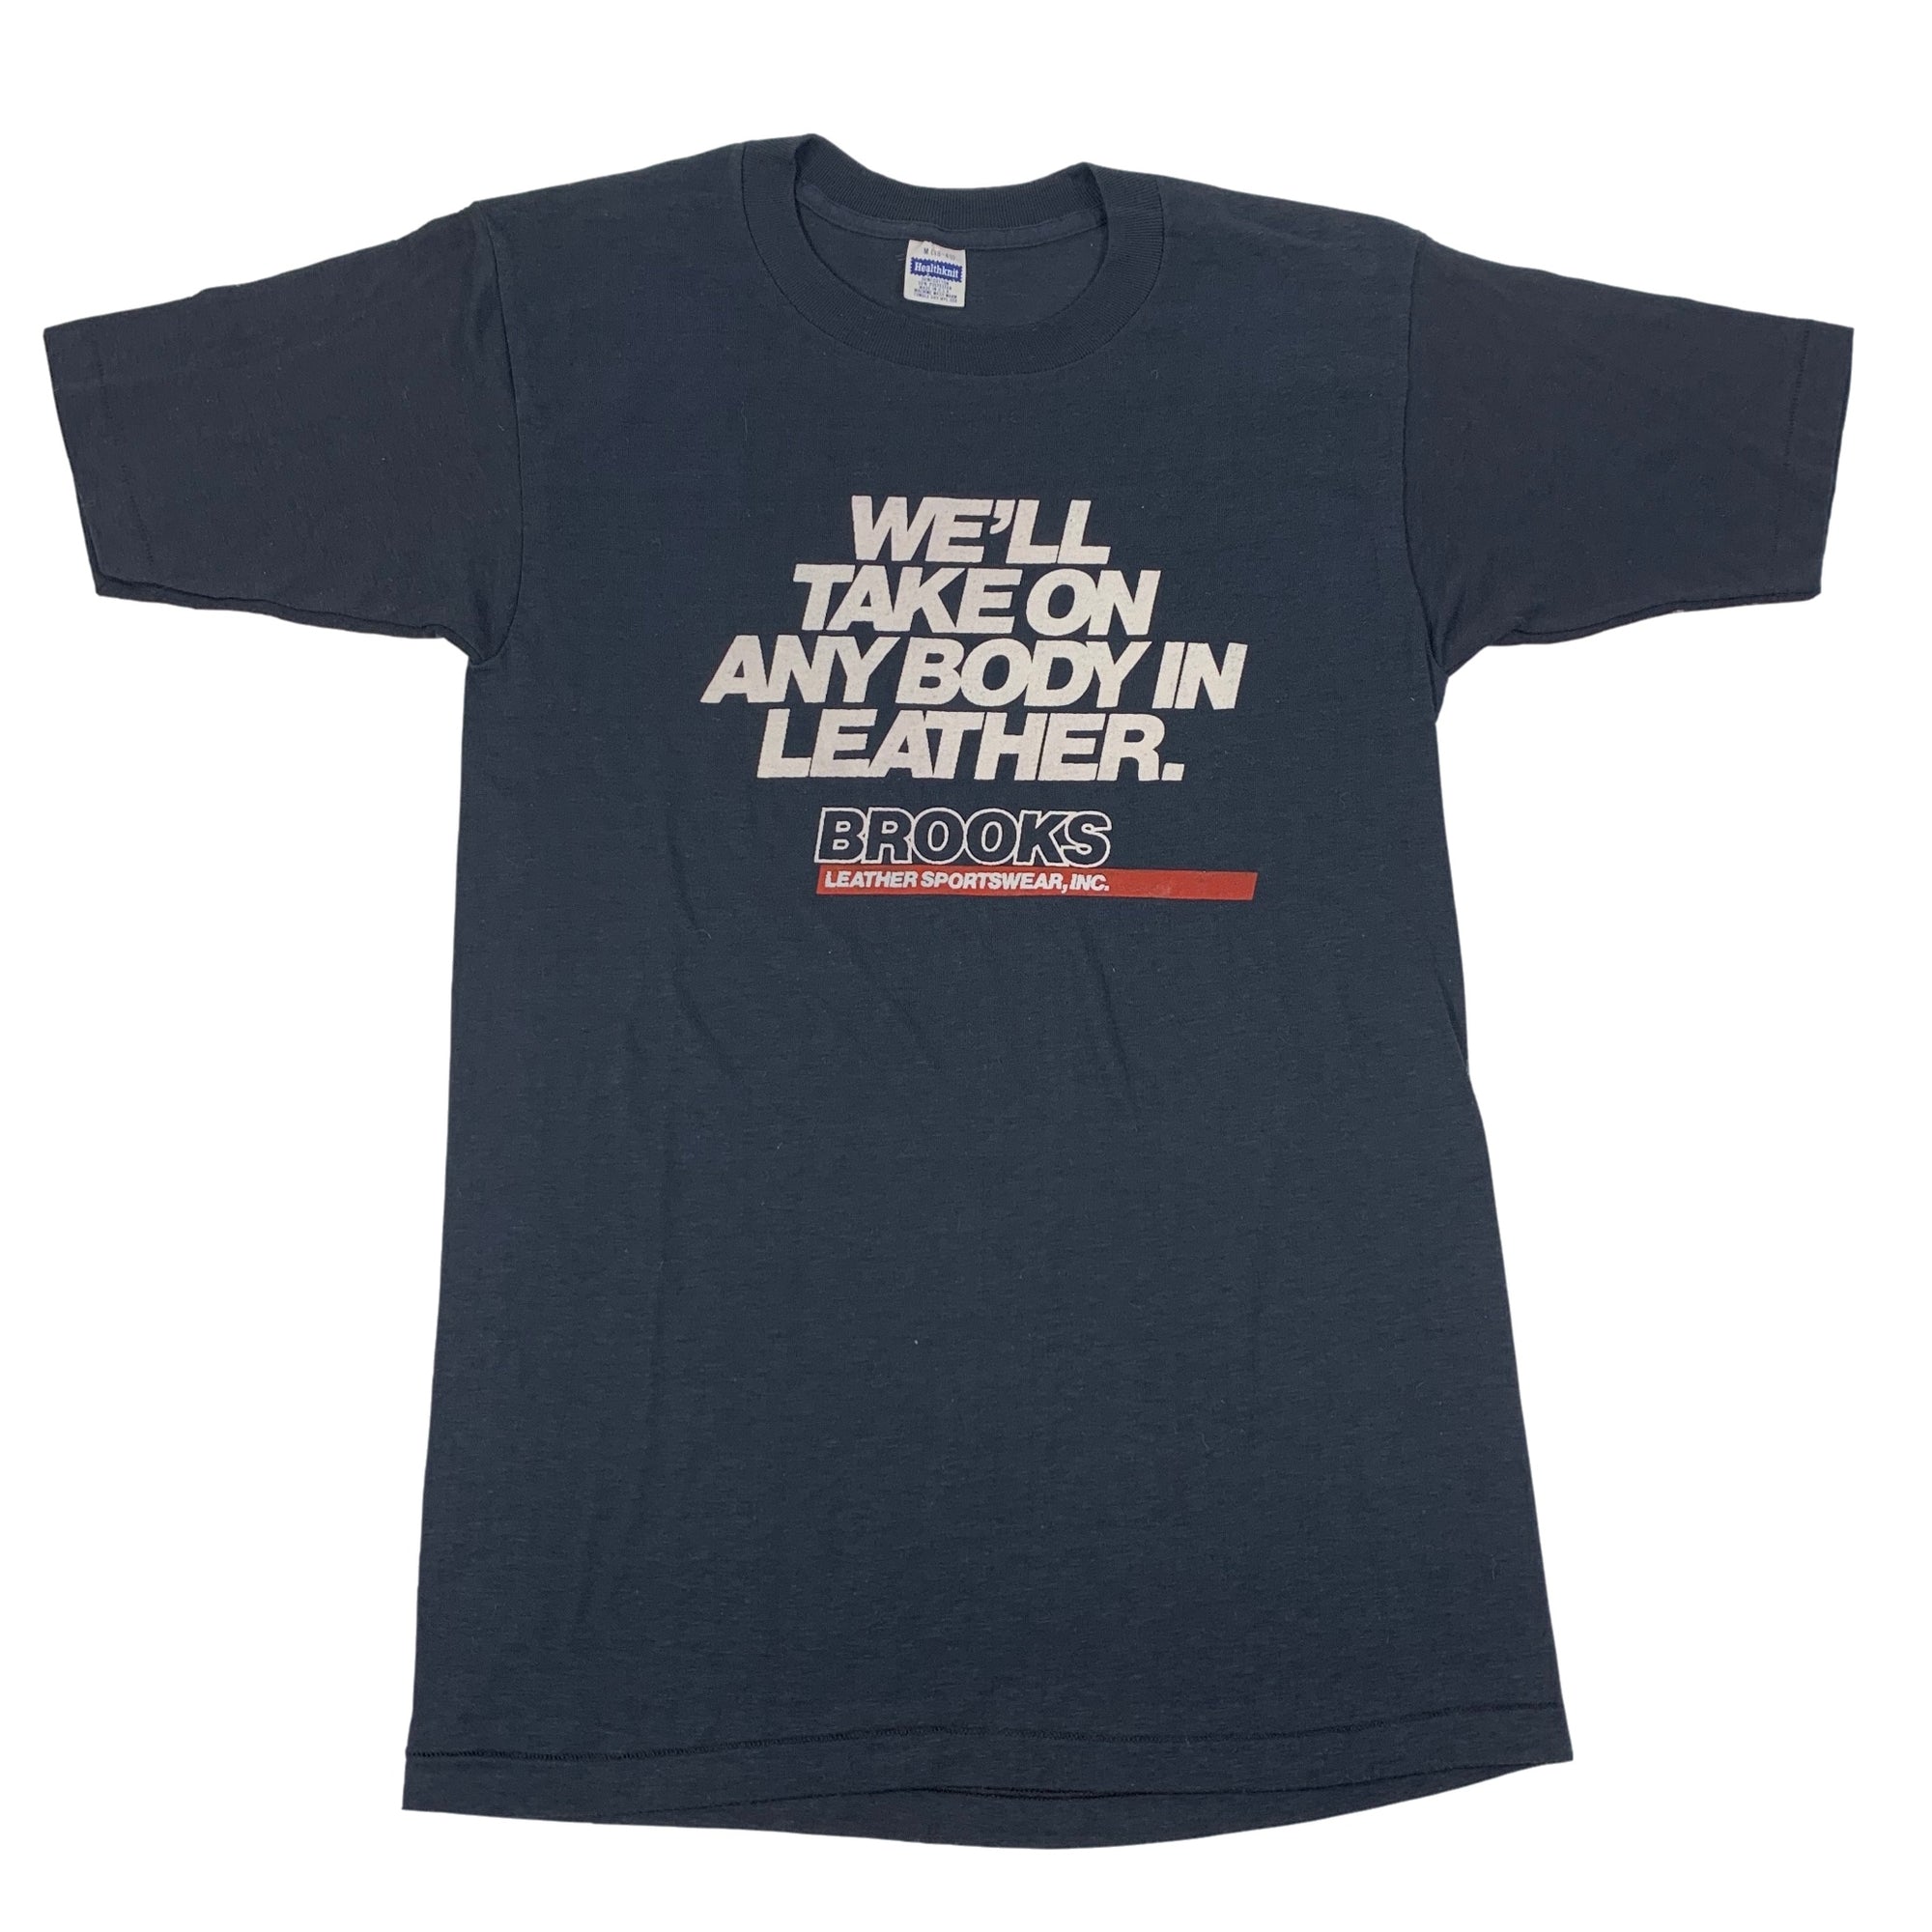 Vintage Brooks Leather "We'll Take On Any Body" T-Shirt - jointcustodydc